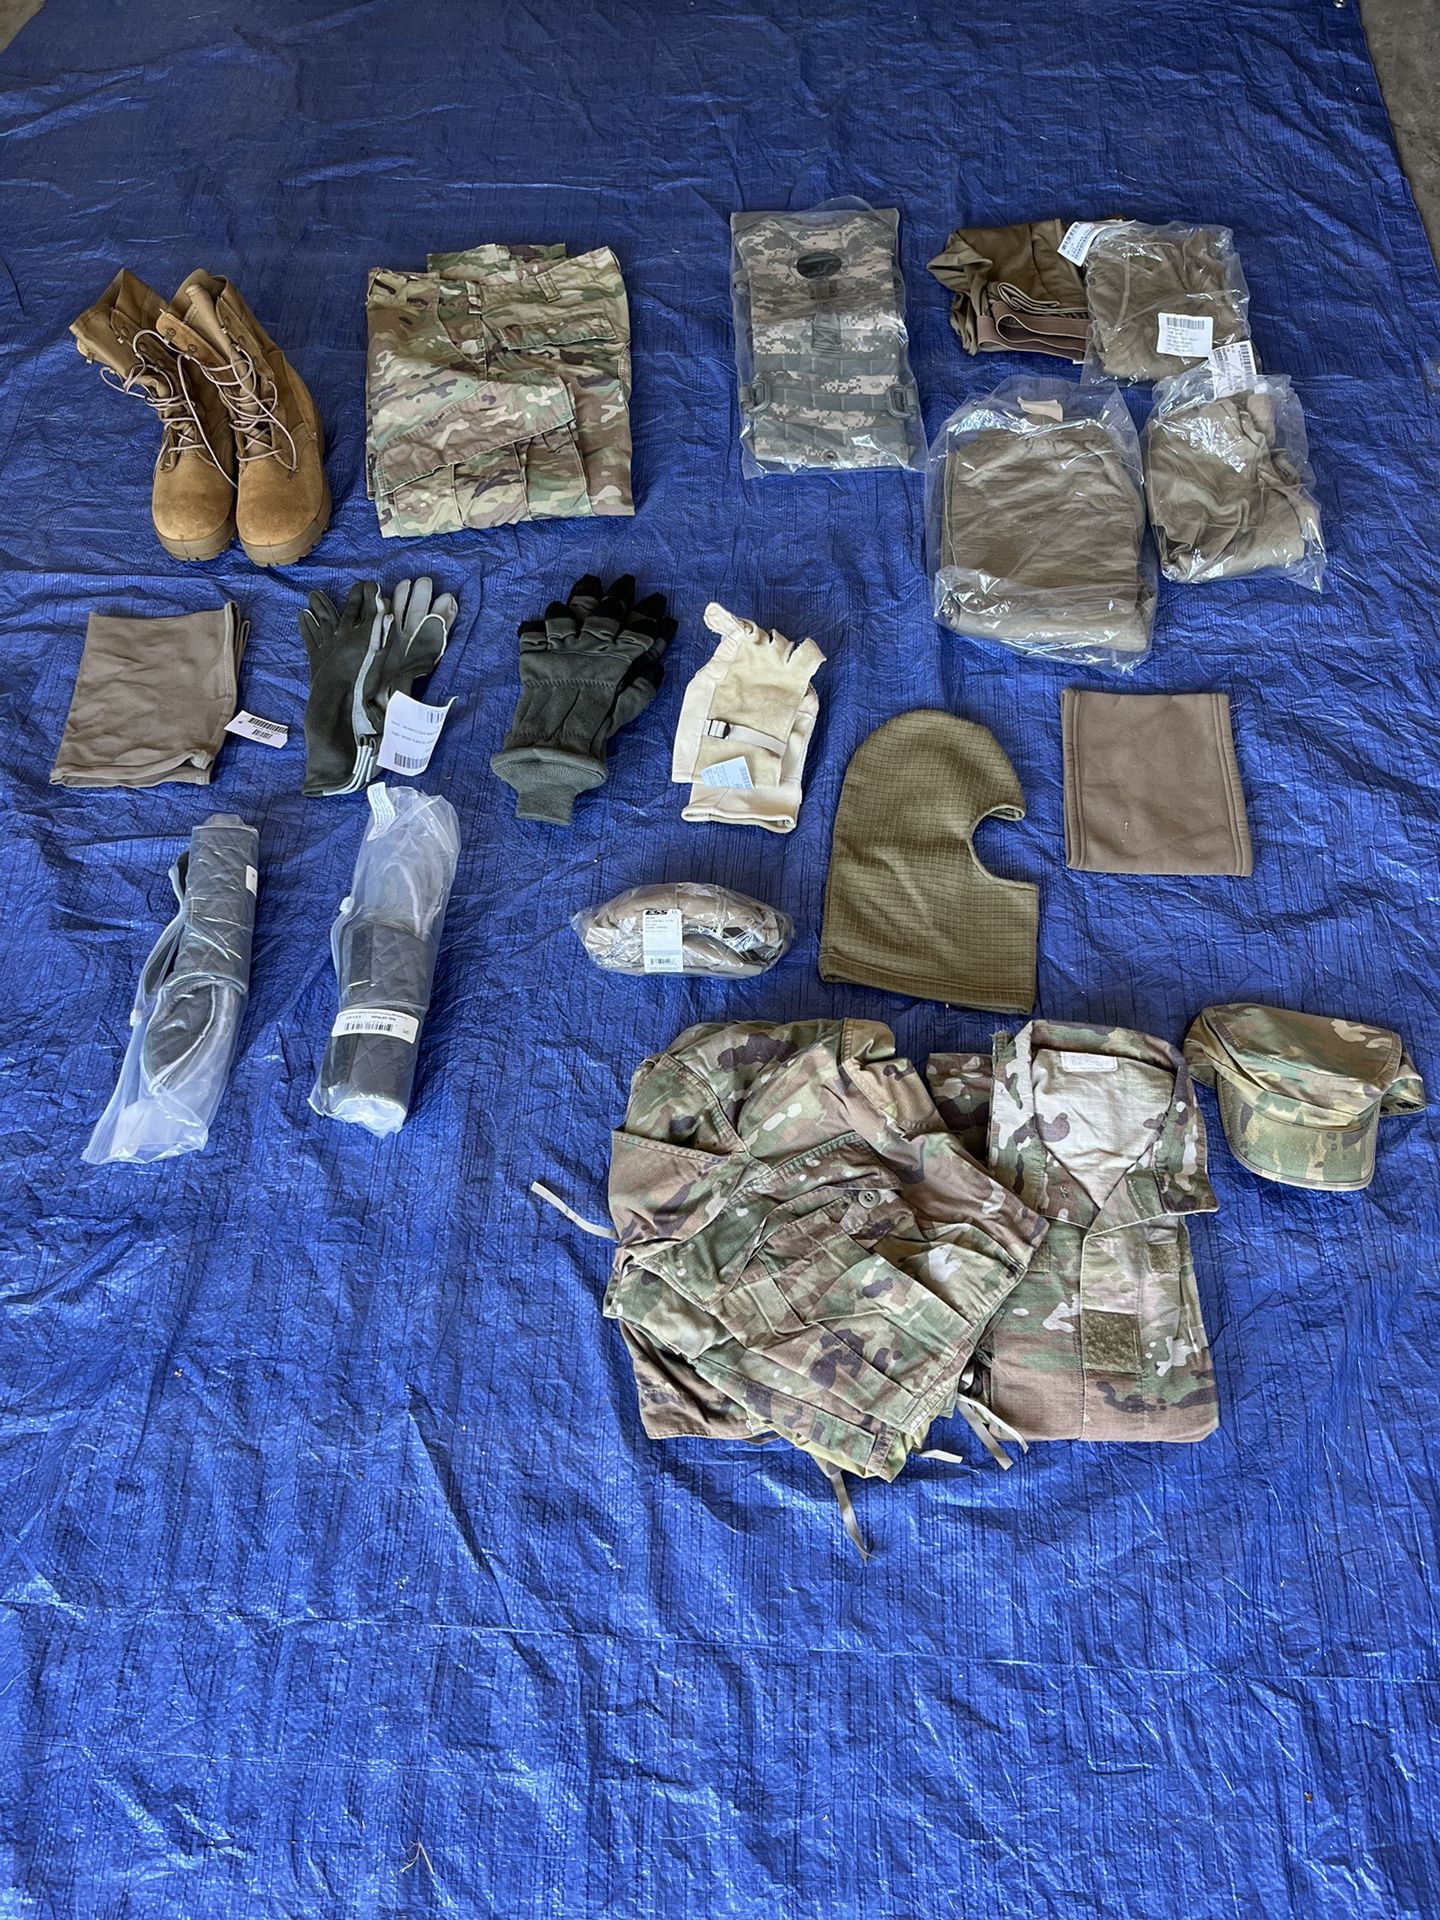 Military Clothing, Gear, and Boots (see Description)